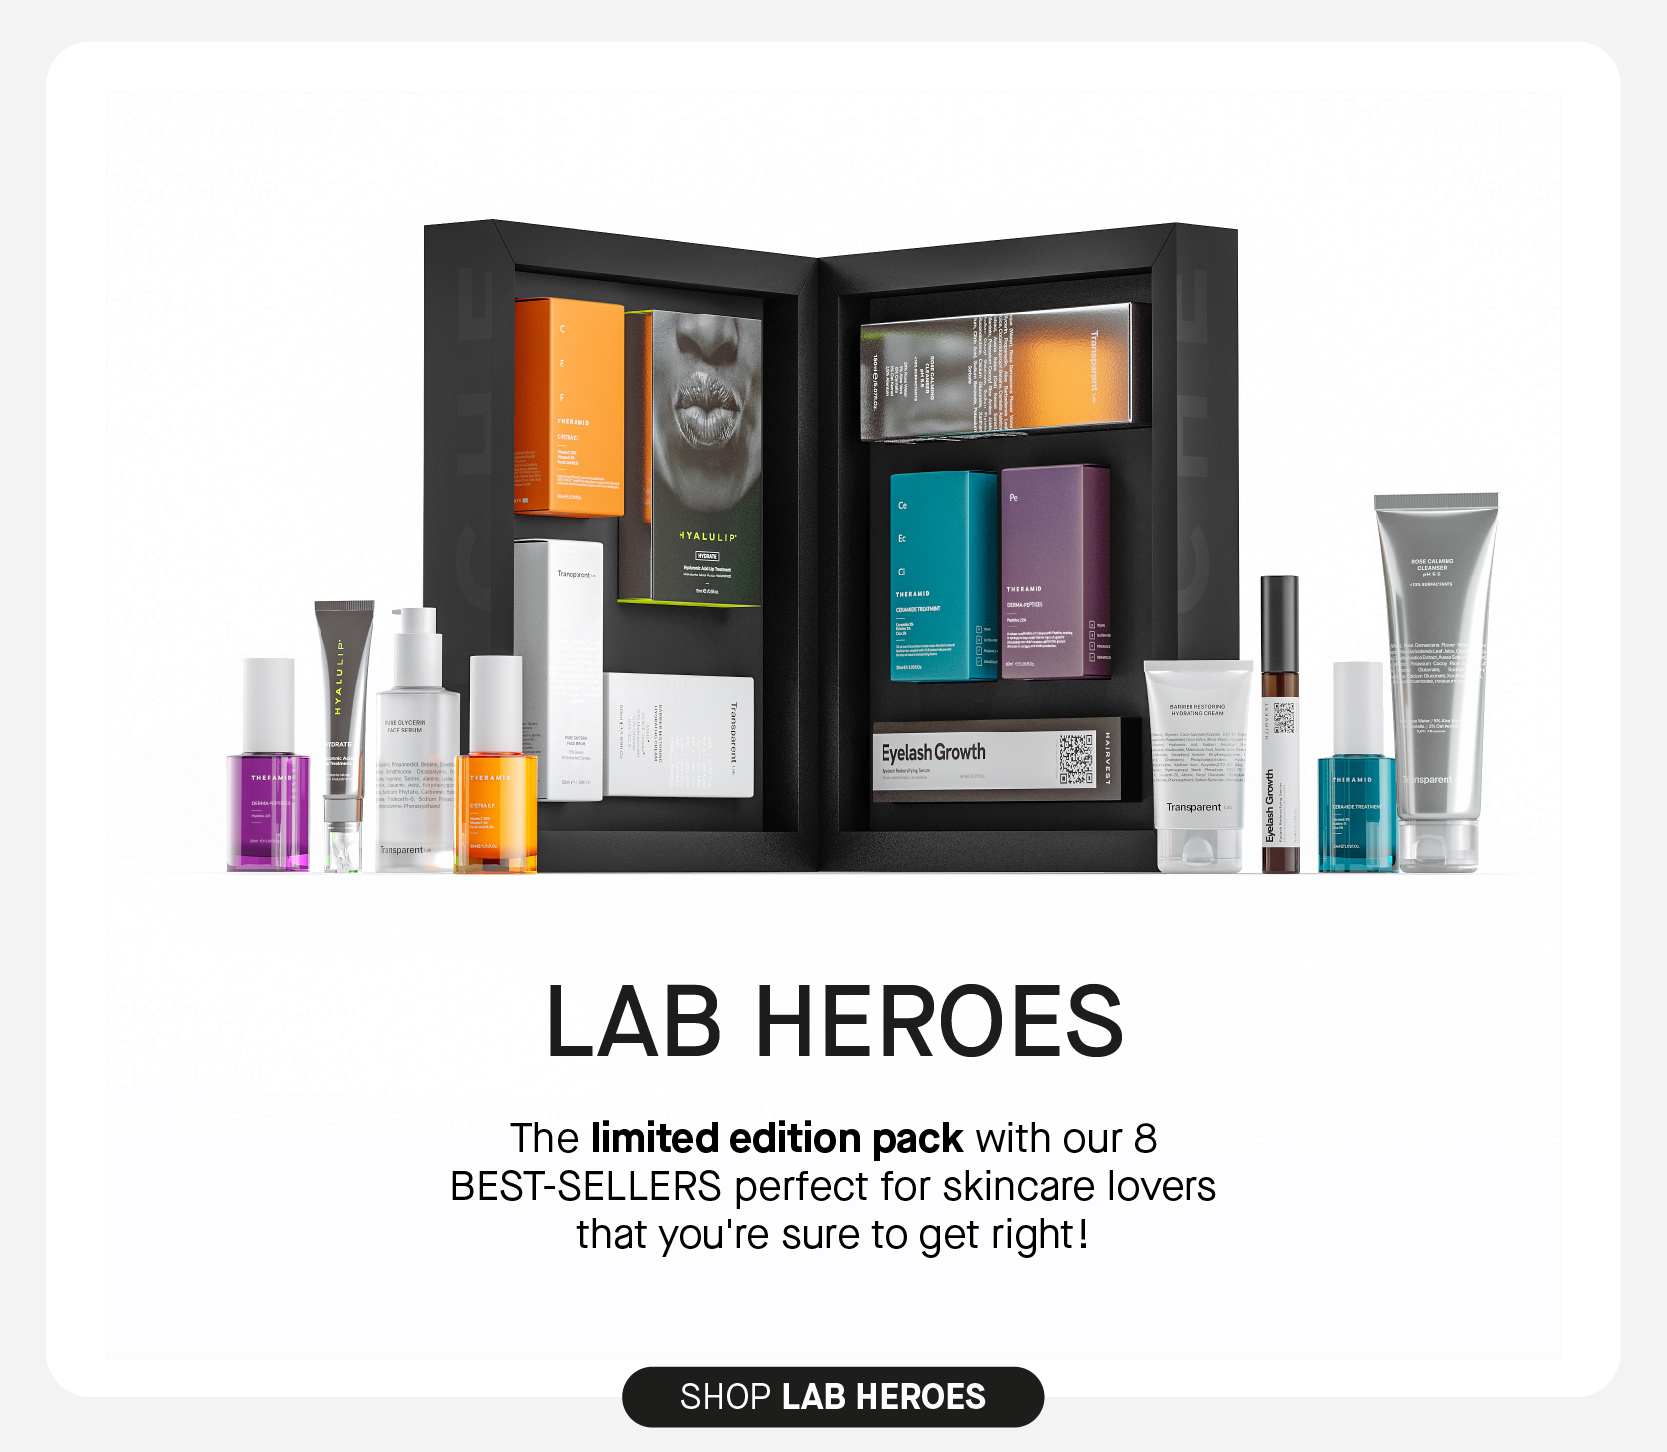  LAB HEROES The limited edition pack with our 8 BEST-SELLERS perfect for skincare lovers that you're sure to get right! SHOP LAB HEROES 